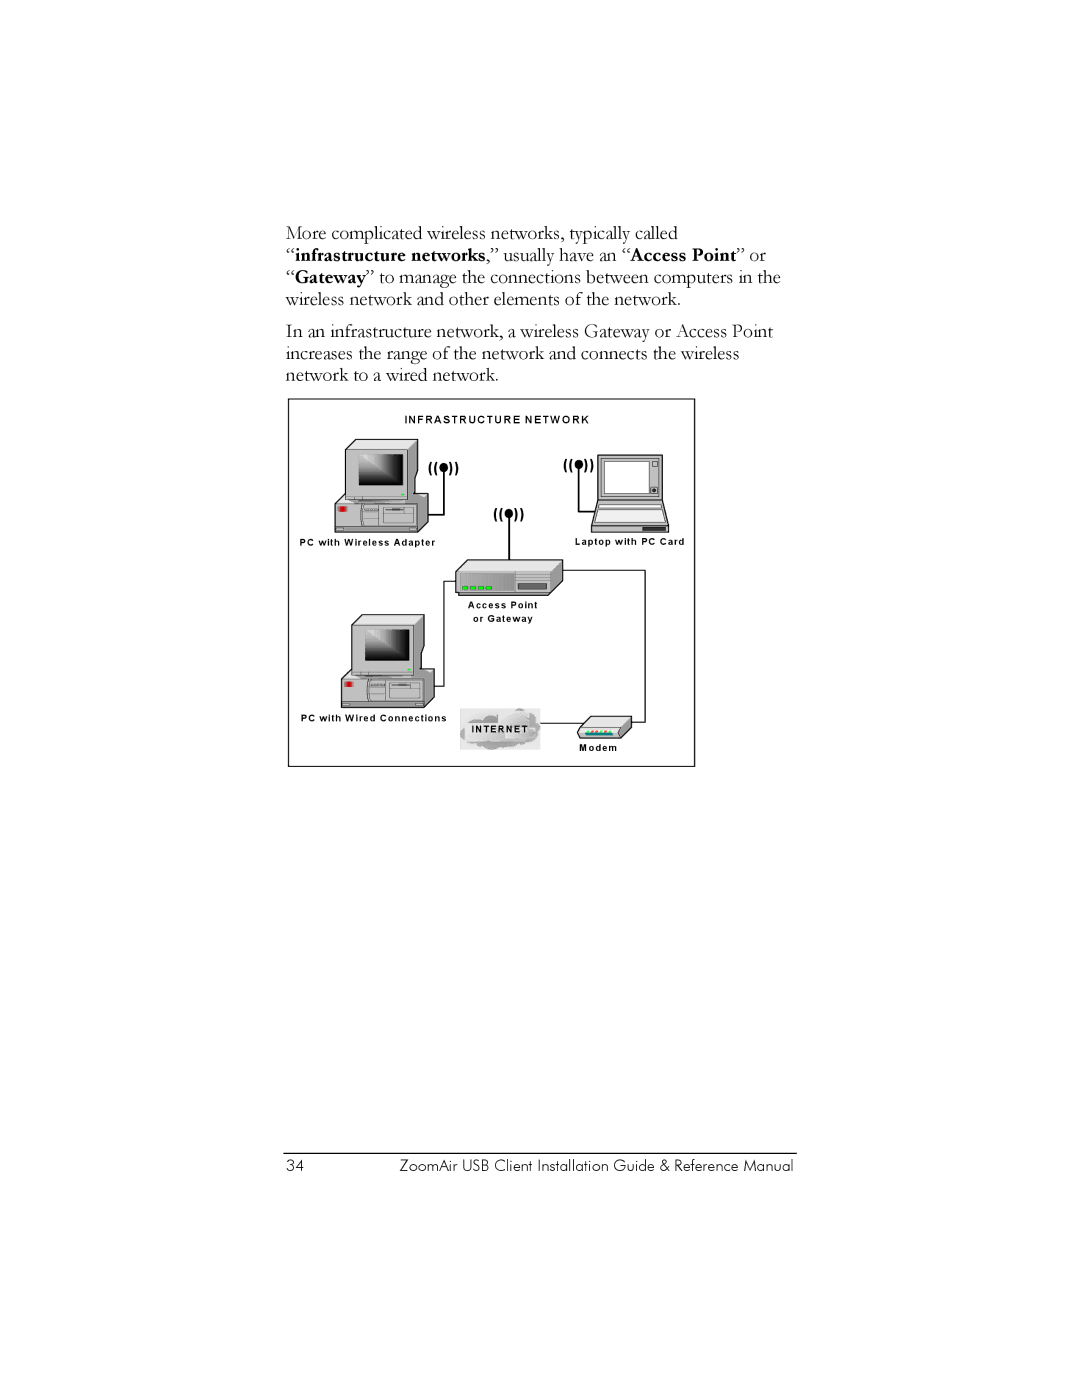 Zoom USB Client manual More complicated wireless networks, typically called 